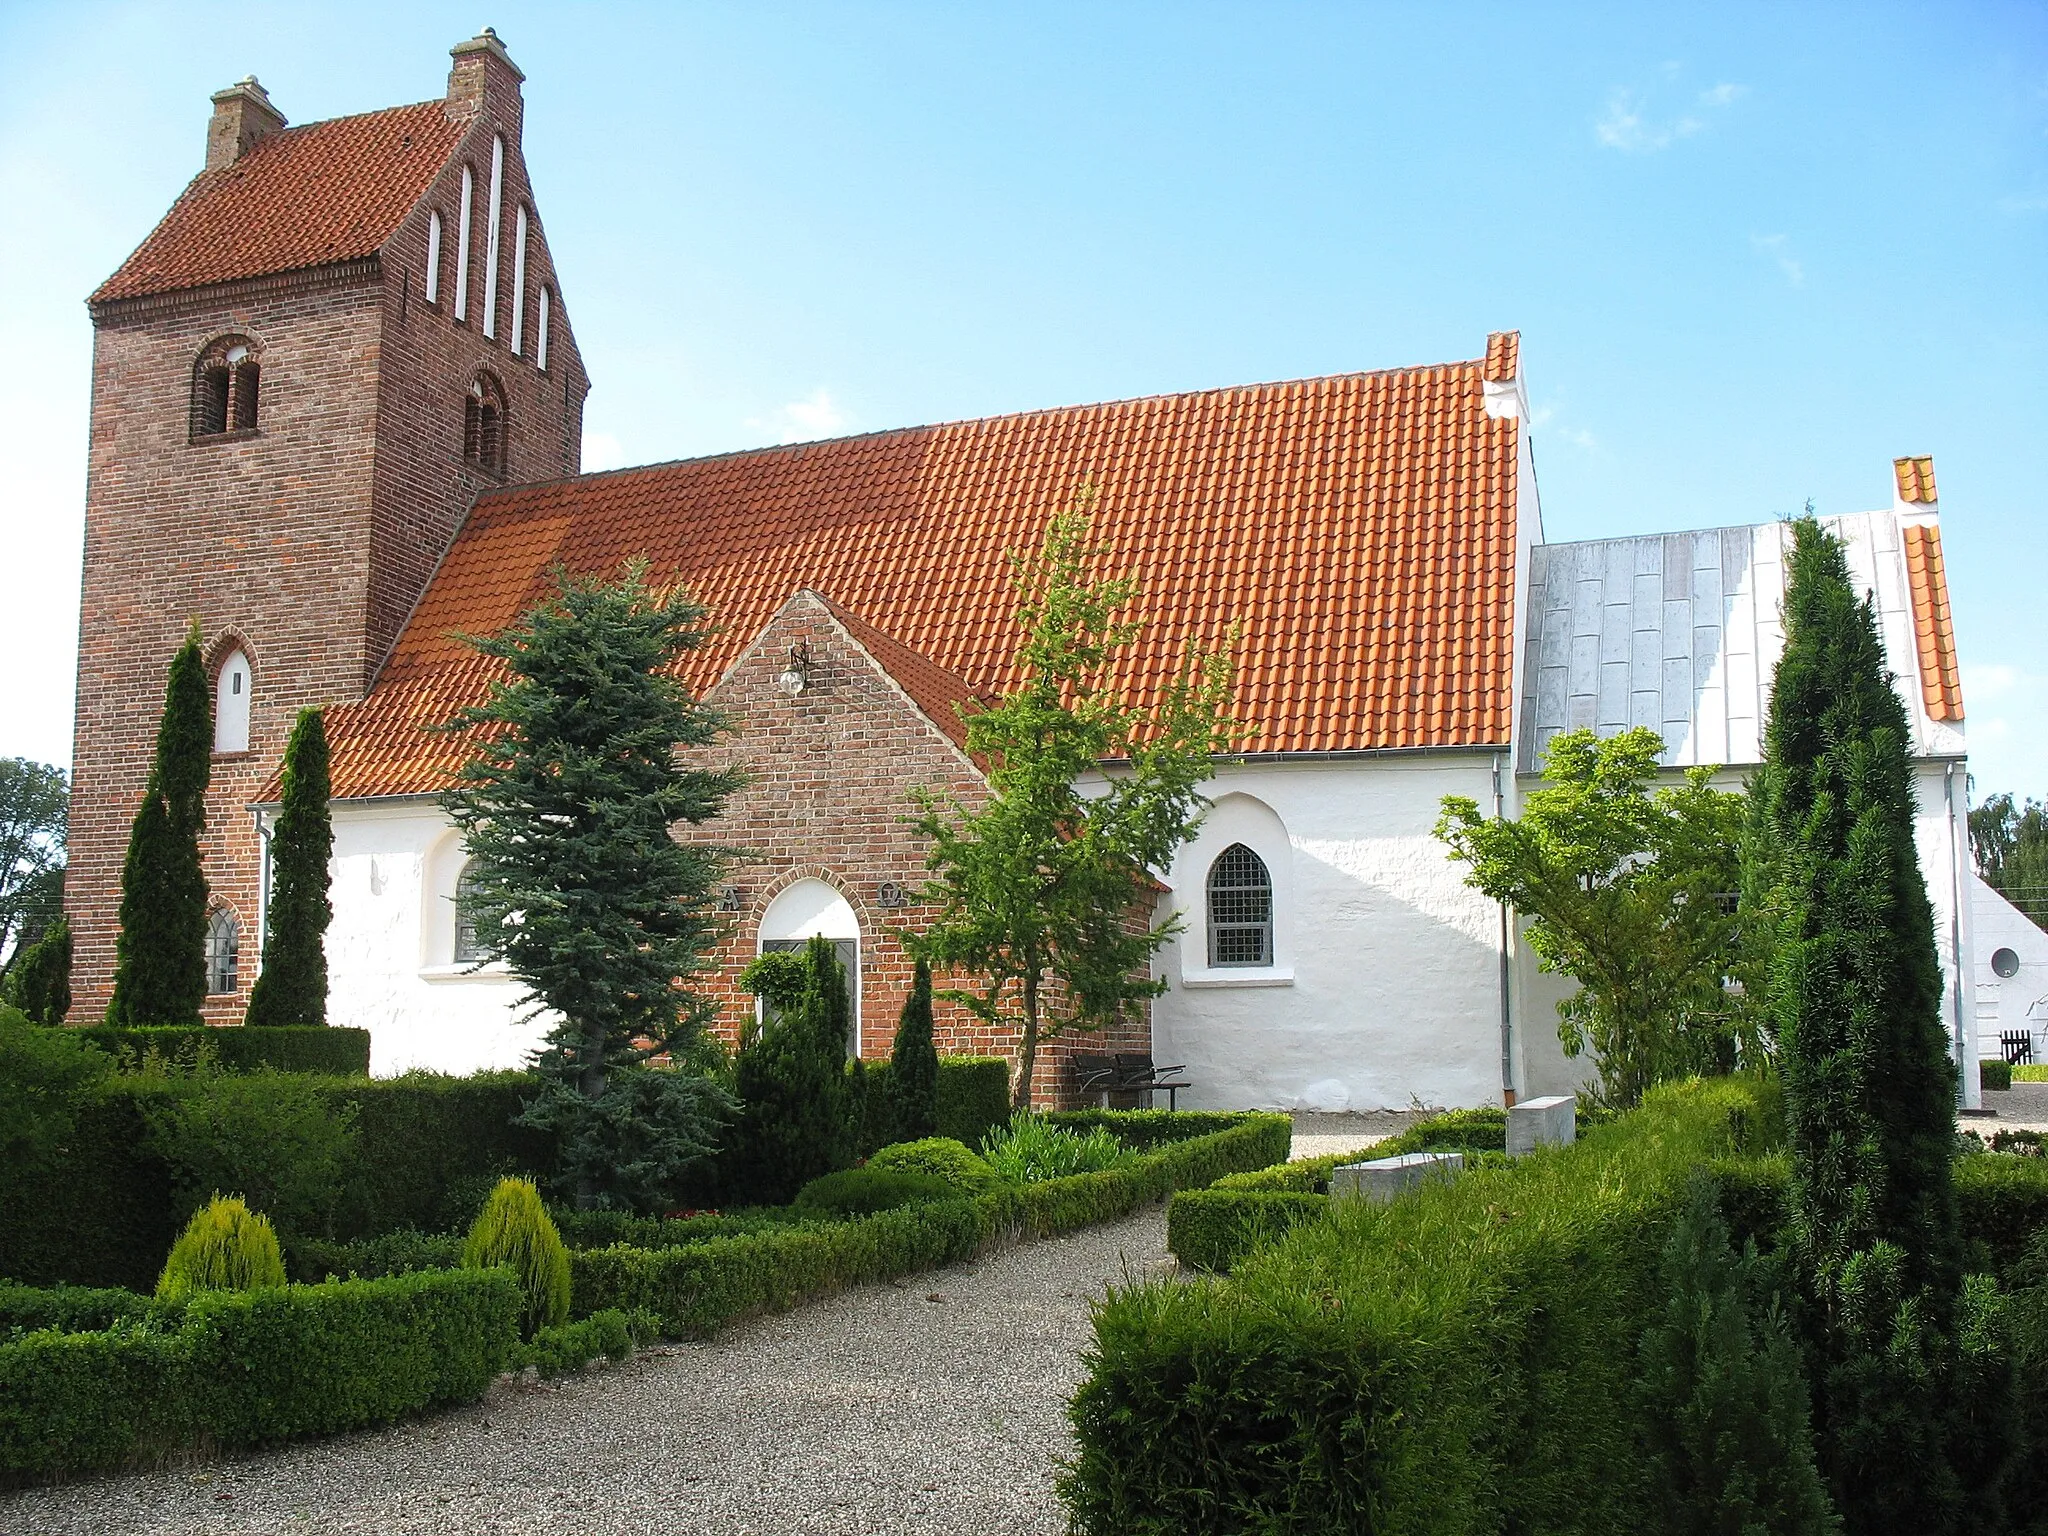 Photo showing: The church "Tune Kirke" in the small town "Tune", located in North East Zealand, east Denmark.